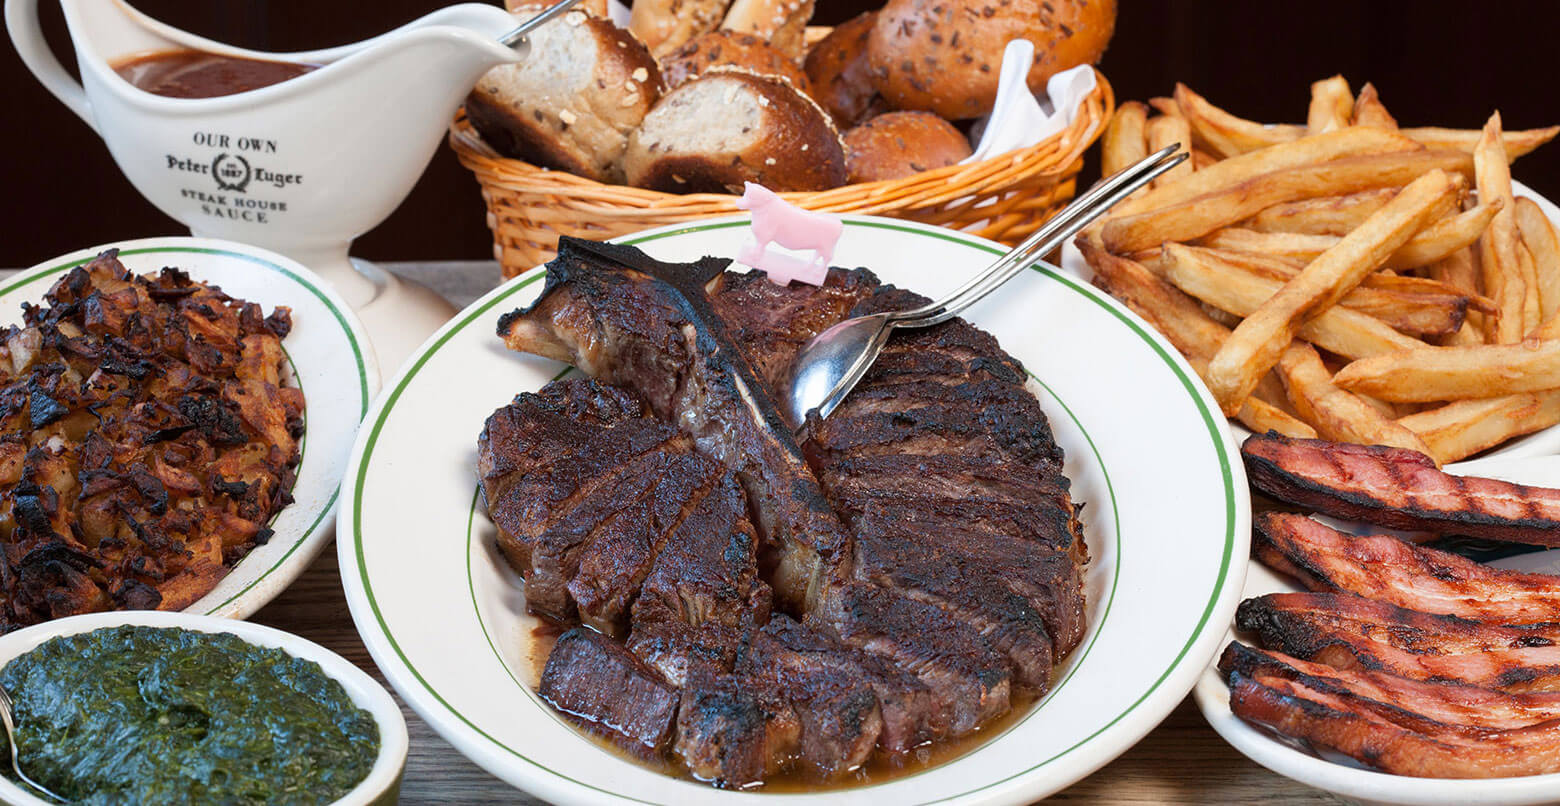 Peter Luger Steak House offering delivery and takeout